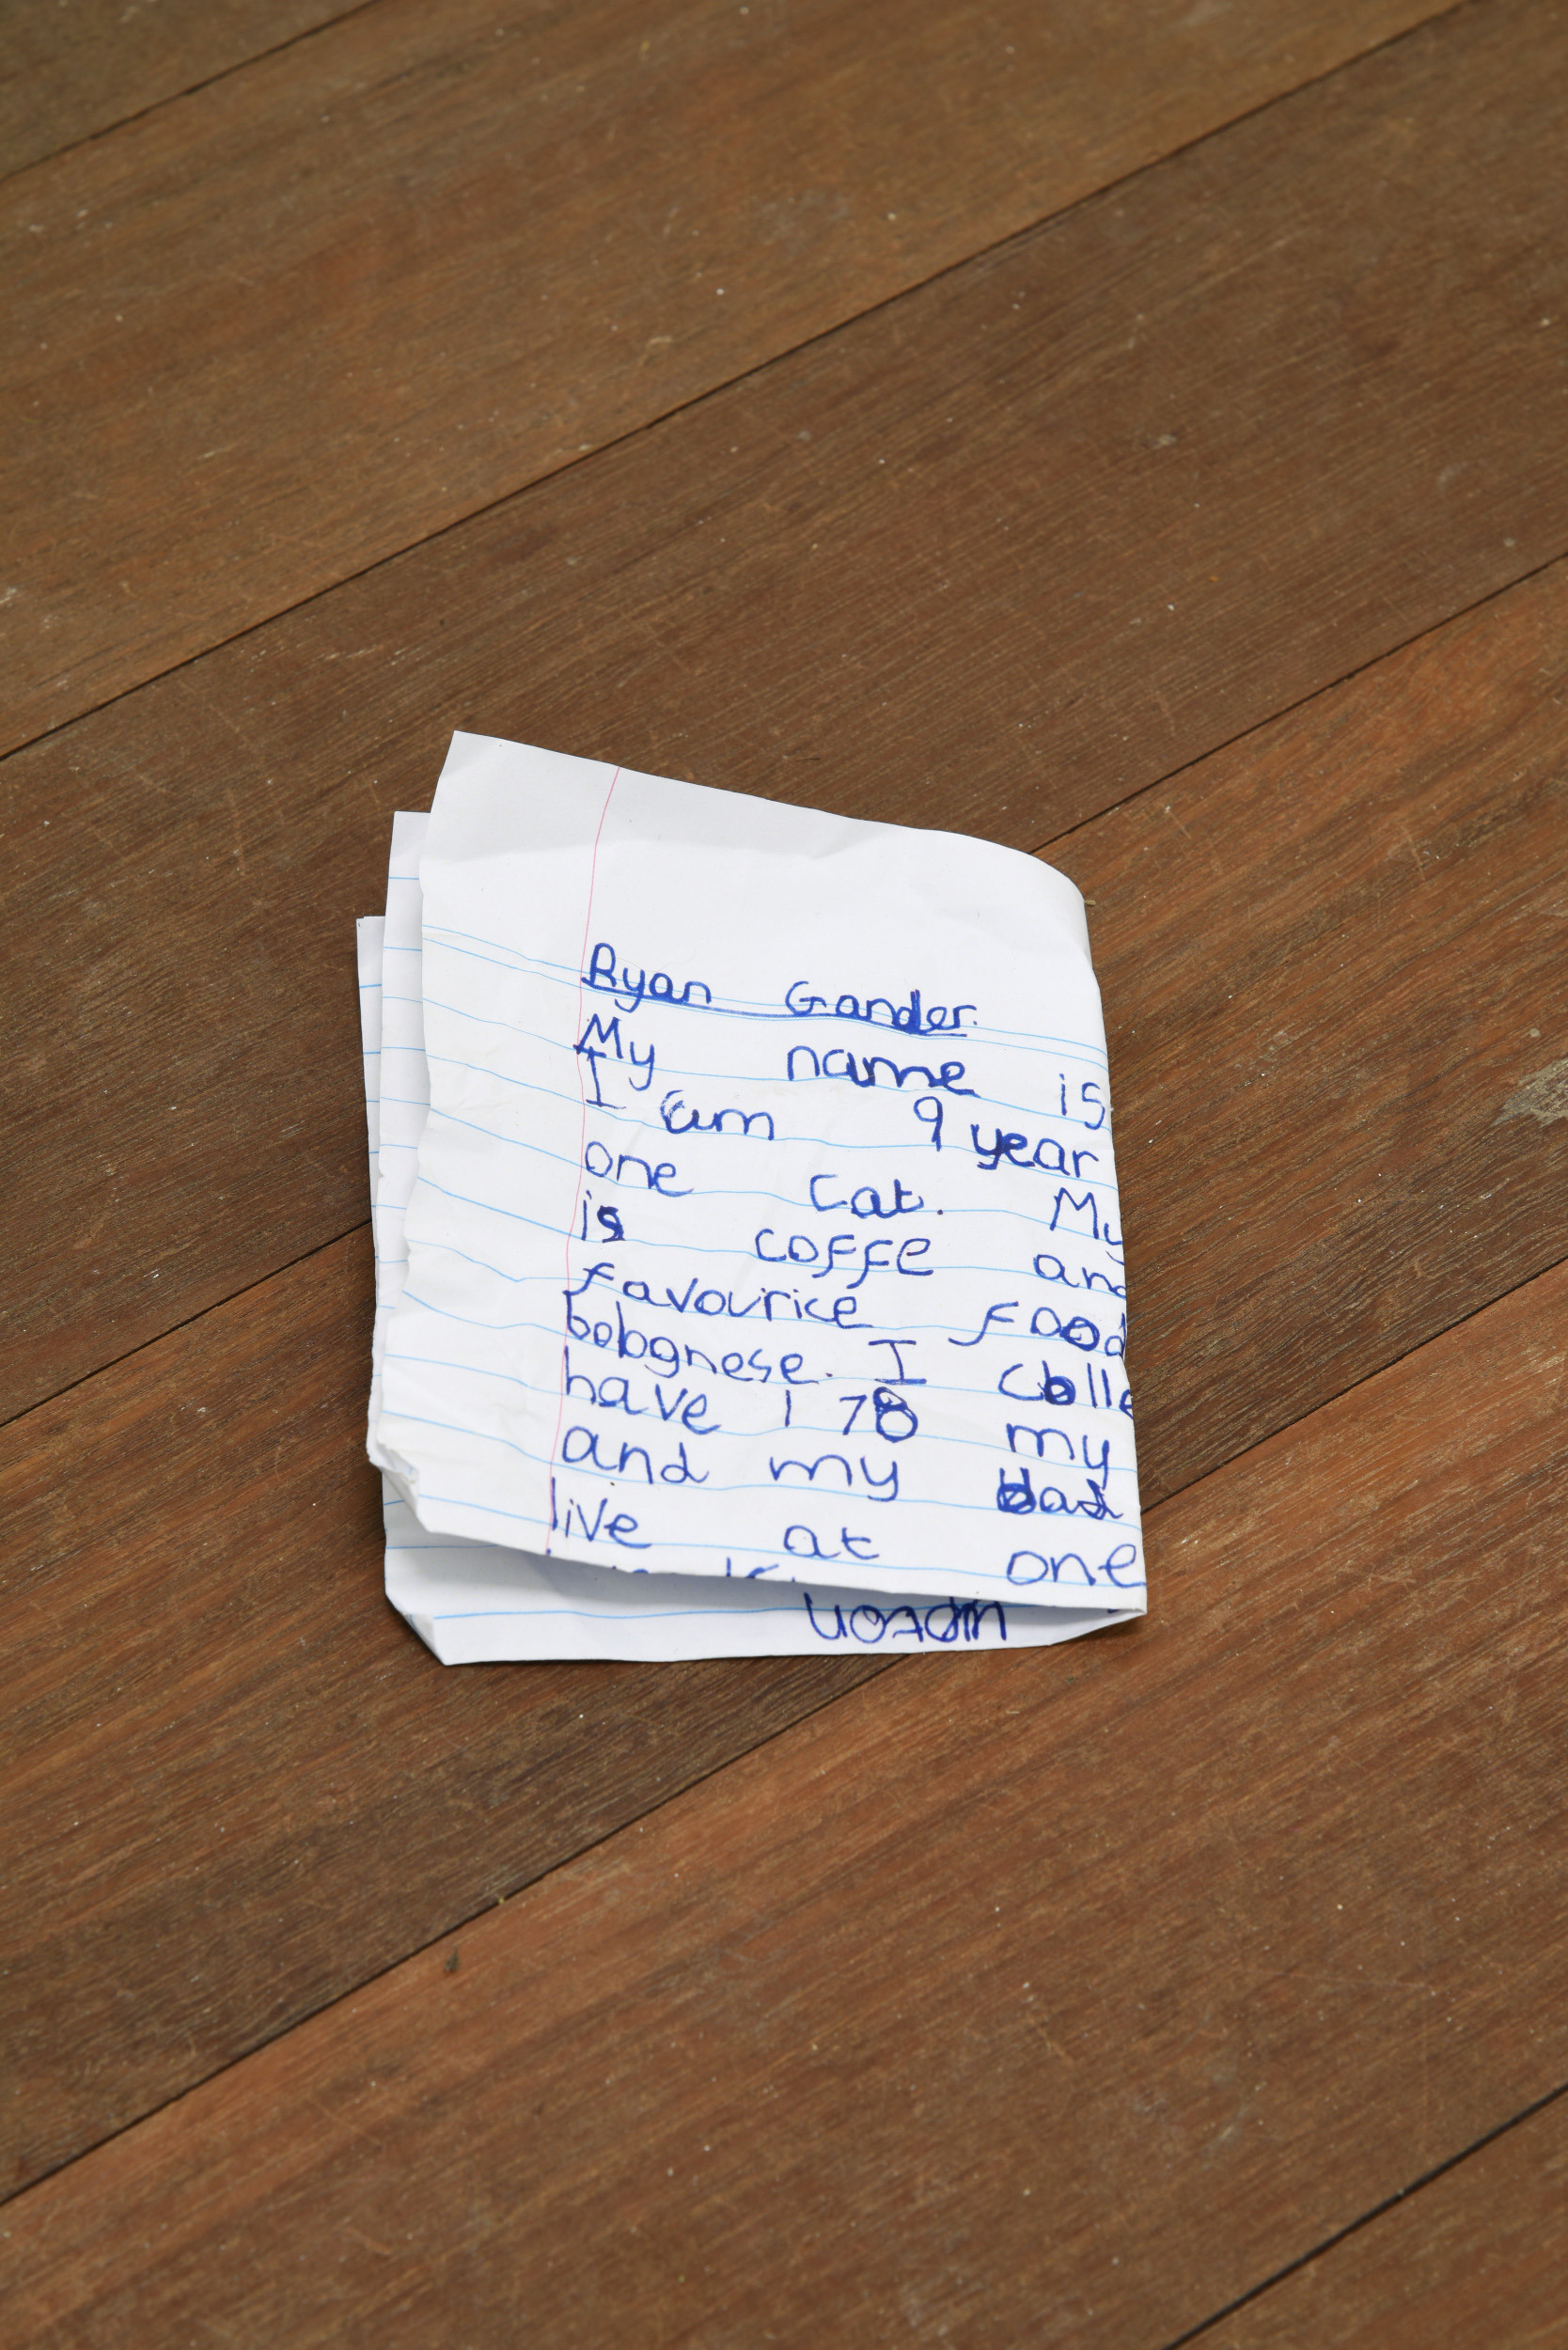 Ryan Gander, Letter to a young artist, 2019-2020, A crumpled letter hand written by the artist, addressed to an unidentified 'young artist', discarded or accidentally dropped on the gallery floor.